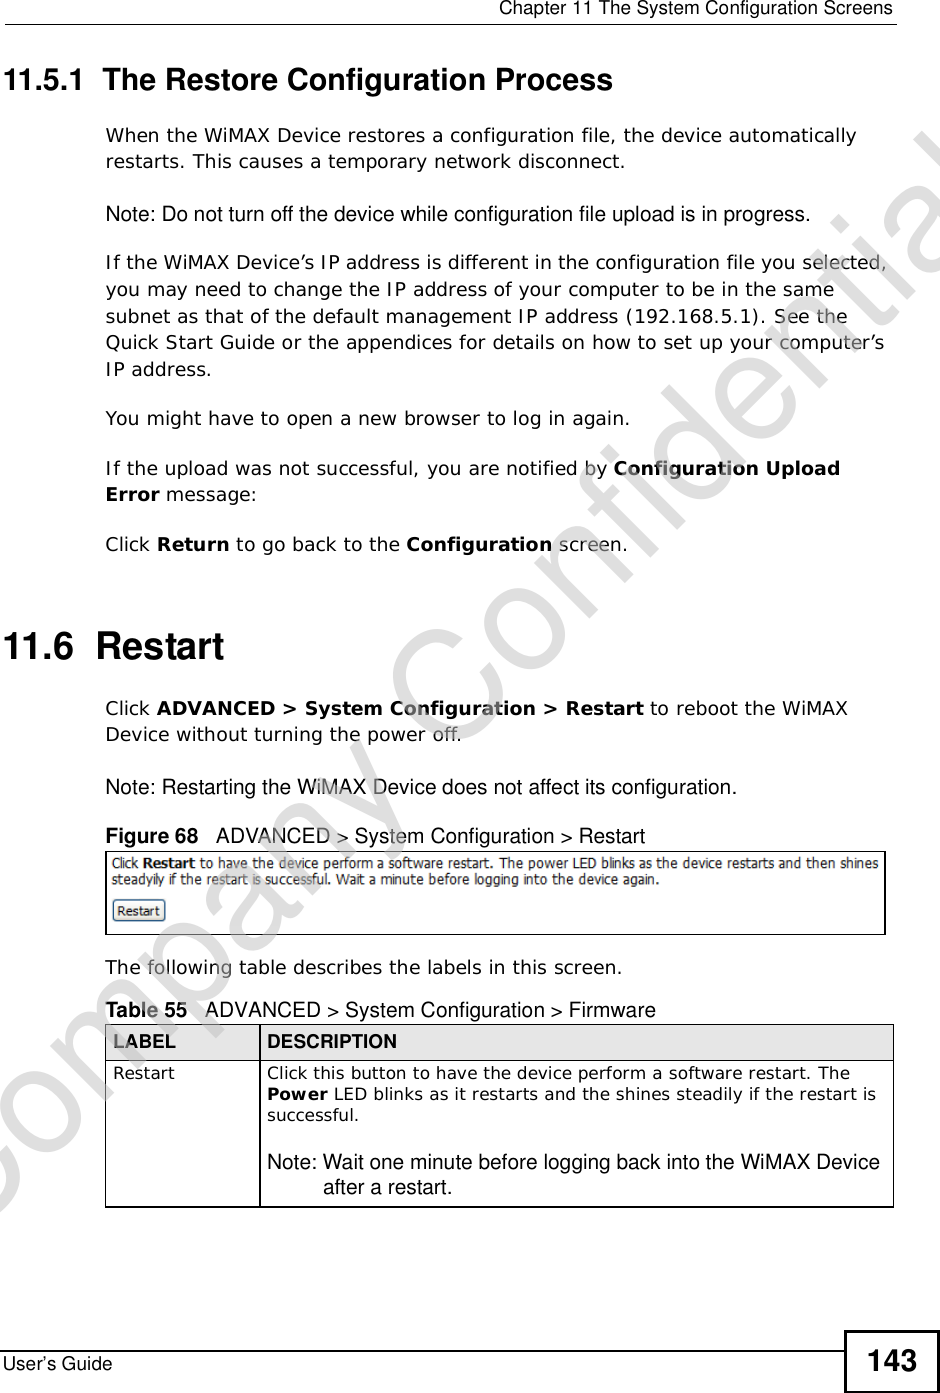  Chapter 11The System Configuration ScreensUser’s Guide 14311.5.1  The Restore Configuration ProcessWhen the WiMAX Device restores a configuration file, the device automatically restarts. This causes a temporary network disconnect. Note: Do not turn off the device while configuration file upload is in progress.If the WiMAX Device’s IP address is different in the configuration file you selected, you may need to change the IP address of your computer to be in the same subnet as that of the default management IP address (192.168.5.1). See the Quick Start Guide or the appendices for details on how to set up your computer’s IP address.You might have to open a new browser to log in again.If the upload was not successful, you are notified by Configuration Upload Error message:Click Return to go back to the Configuration screen.11.6  RestartClick ADVANCED &gt; System Configuration &gt; Restart to reboot the WiMAX Device without turning the power off.Note: Restarting the WiMAX Device does not affect its configuration.Figure 68   ADVANCED &gt; System Configuration &gt; RestartThe following table describes the labels in this screen.    Table 55   ADVANCED &gt; System Configuration &gt; FirmwareLABEL DESCRIPTIONRestart Click this button to have the device perform a software restart. The Power LED blinks as it restarts and the shines steadily if the restart is successful.Note: Wait one minute before logging back into the WiMAX Device after a restart.Company Confidential